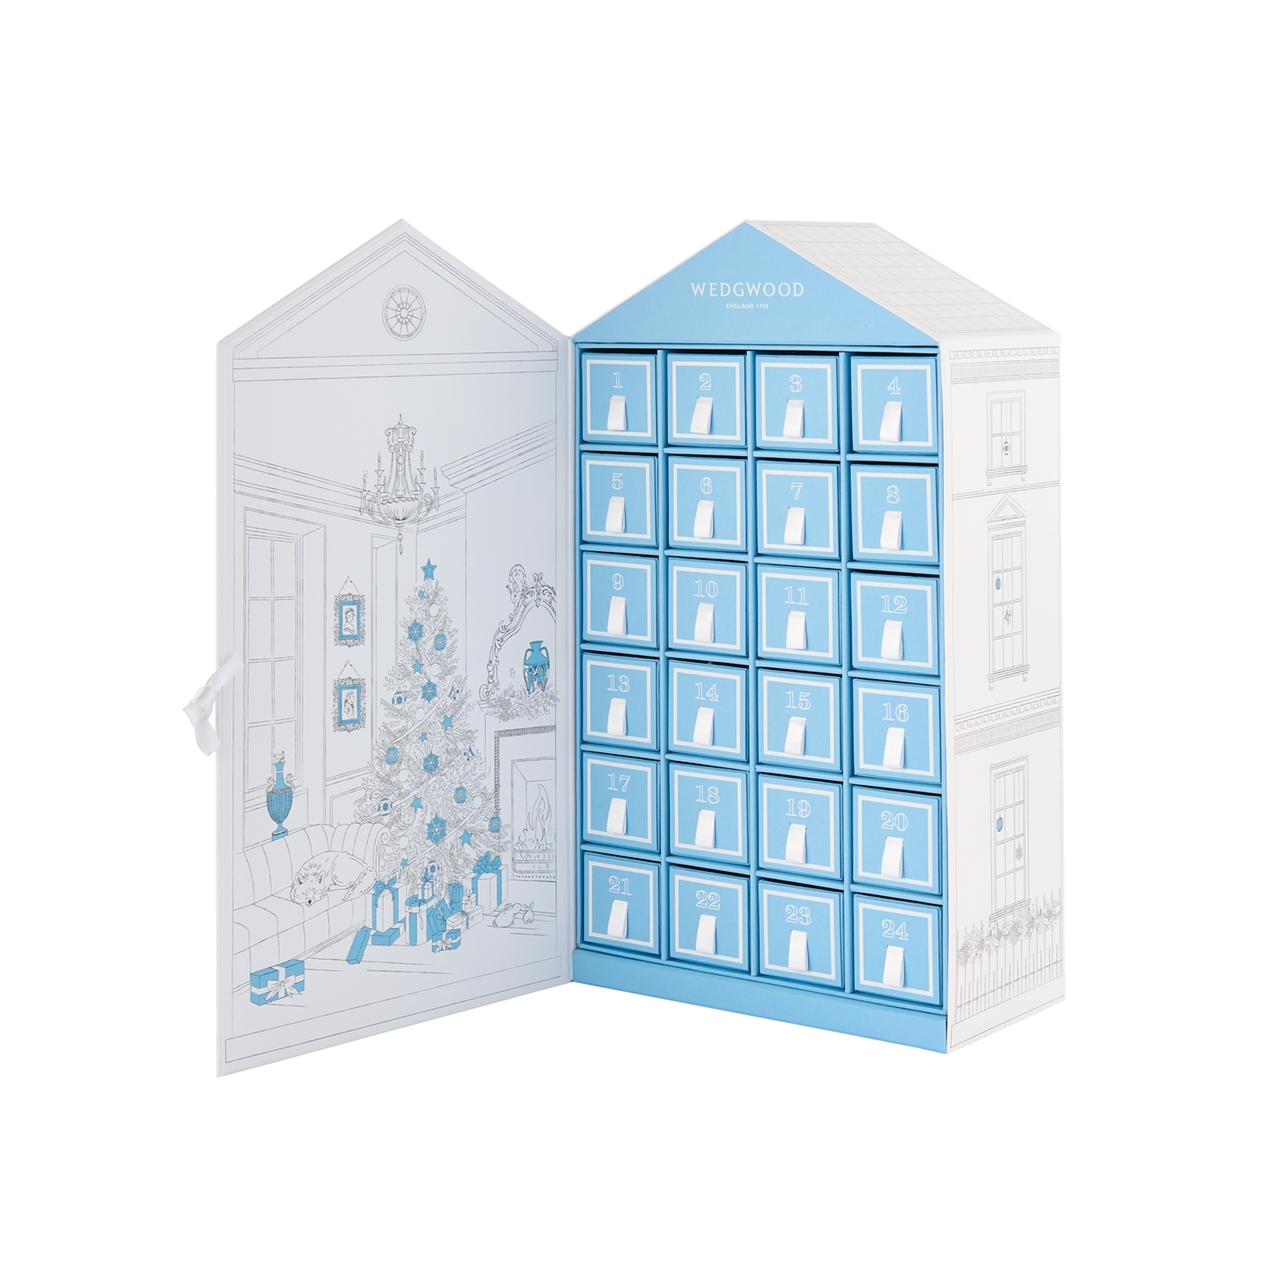 The Wick - Object Wedgwood 2022 Advent Calendar